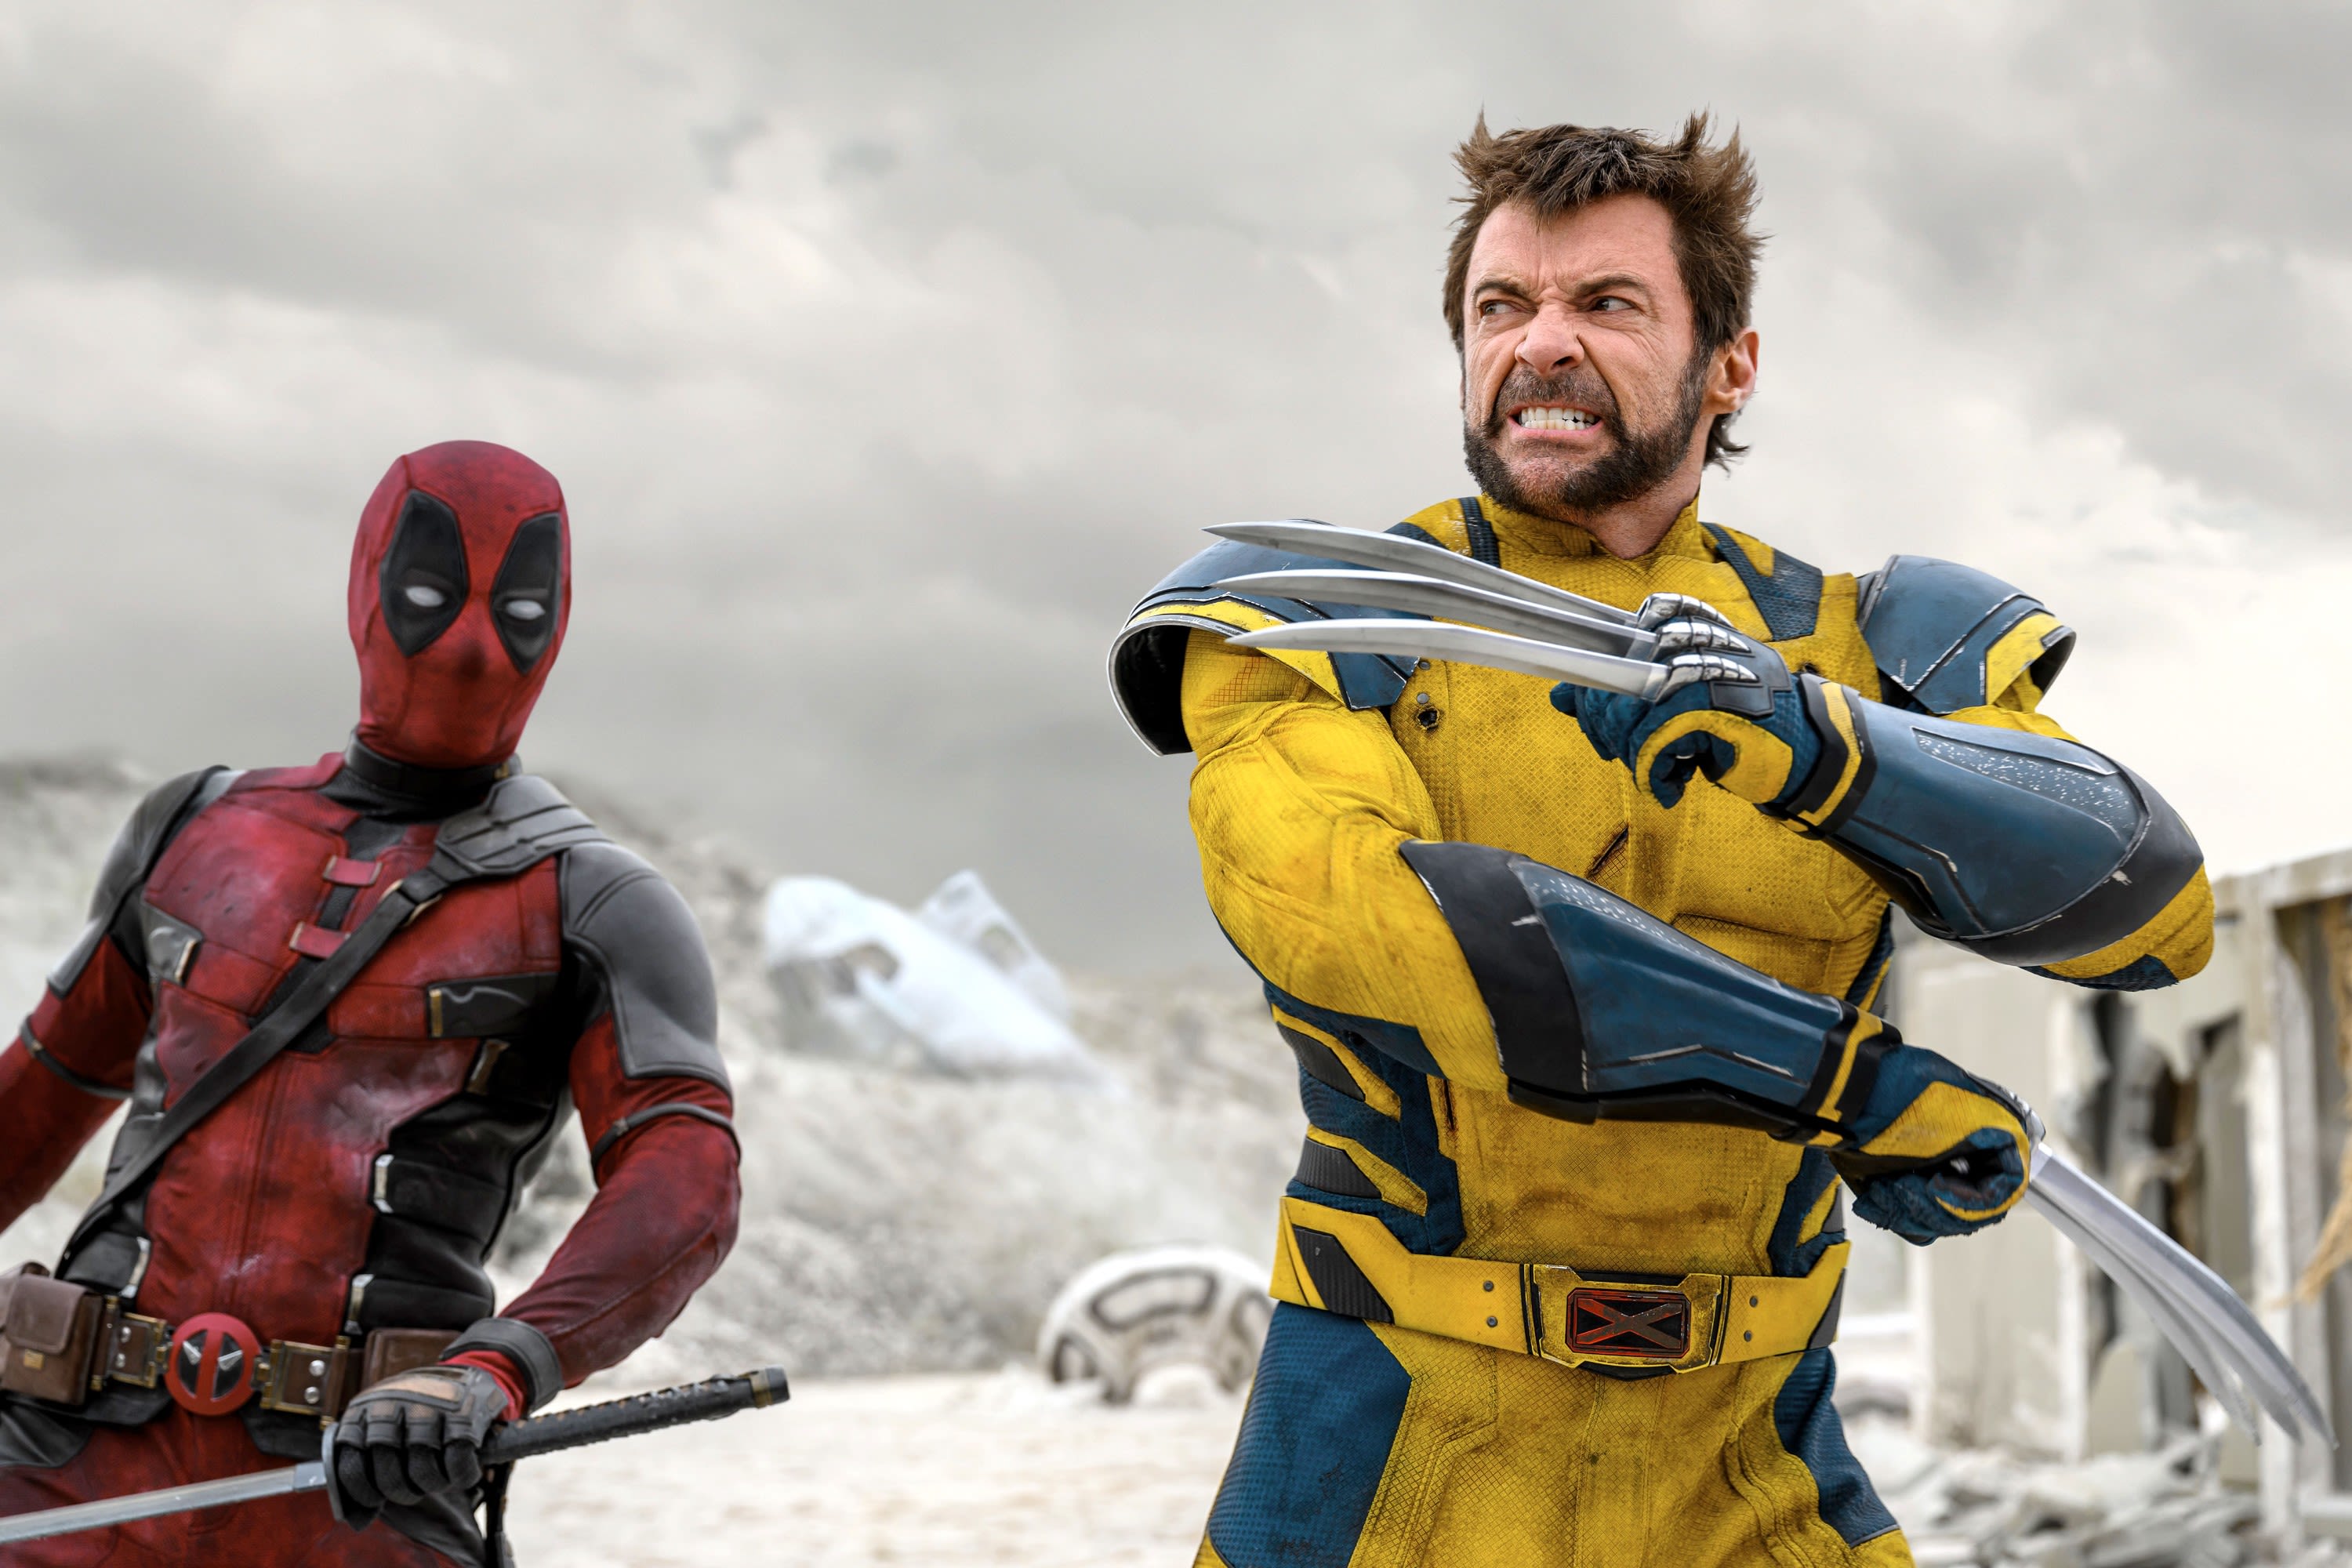 ‘Deadpool & Wolverine’ Goes Wild On Friday With $95M+, 6th-Best Opening Day At Domestic B.O., ‘A’ CinemaScore, Weekend Now...